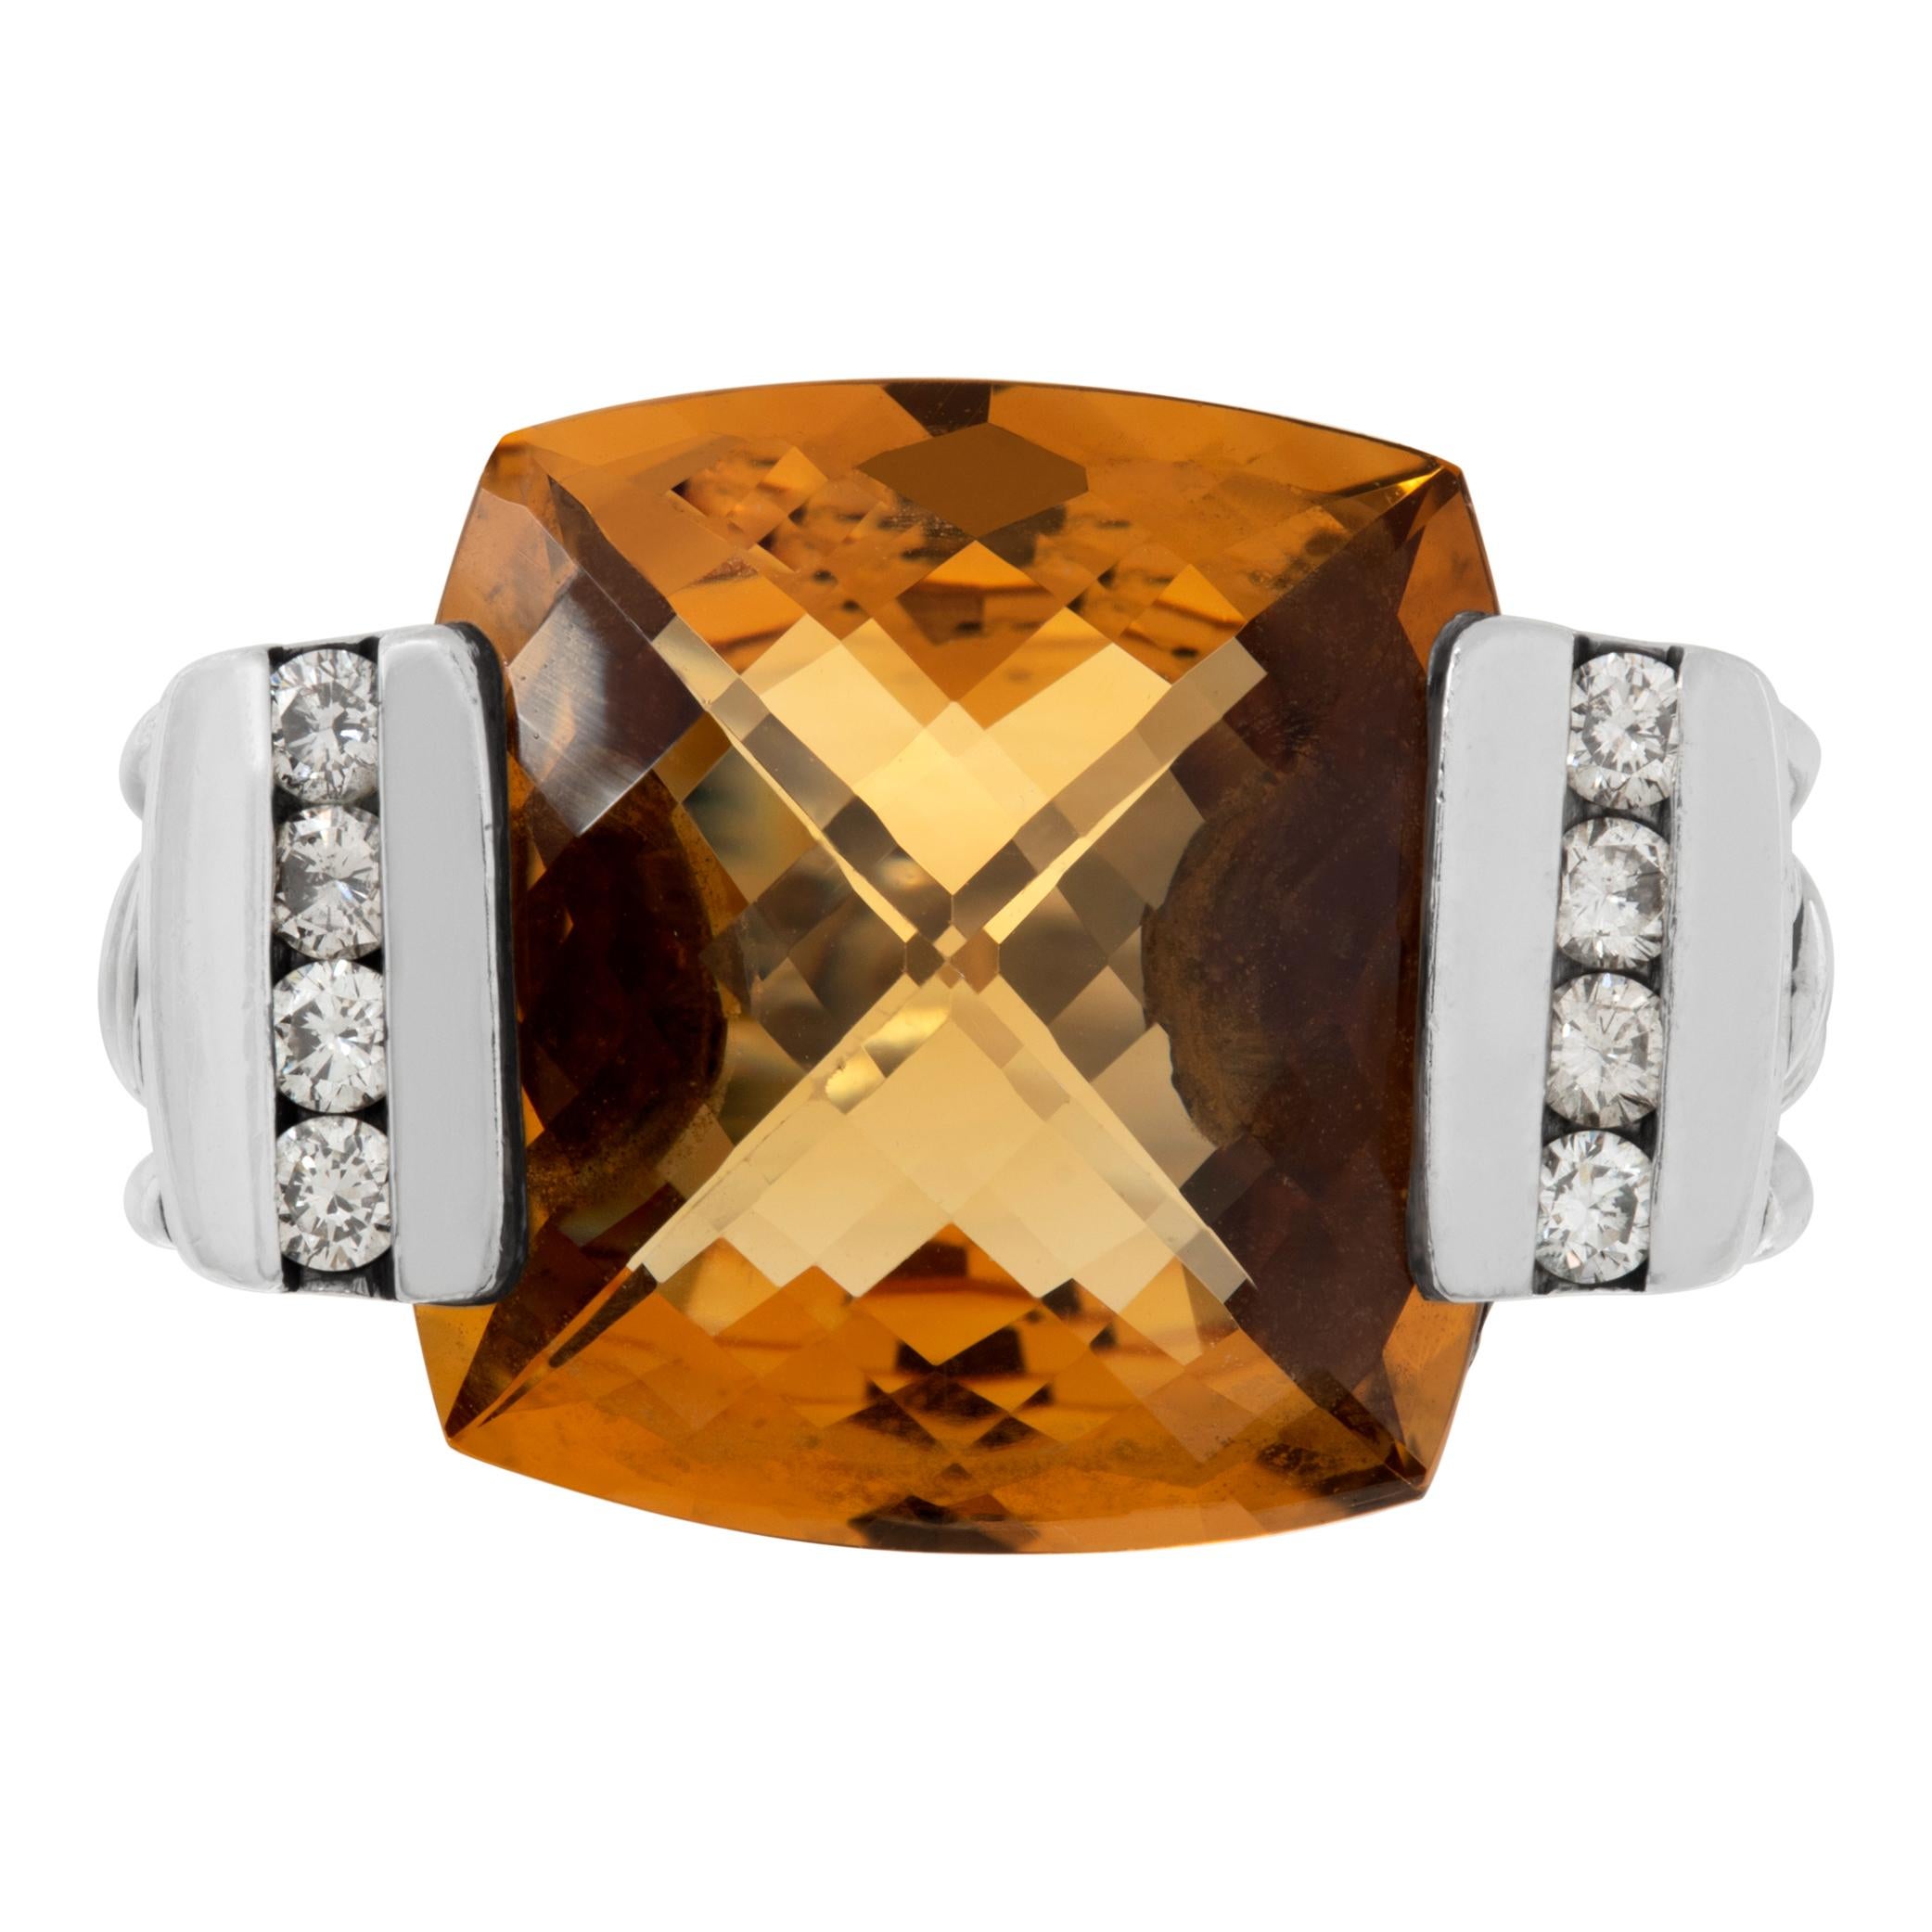 David Yurman Deco citrine (15mm) ring in sterling silver with diamonds. Size 6